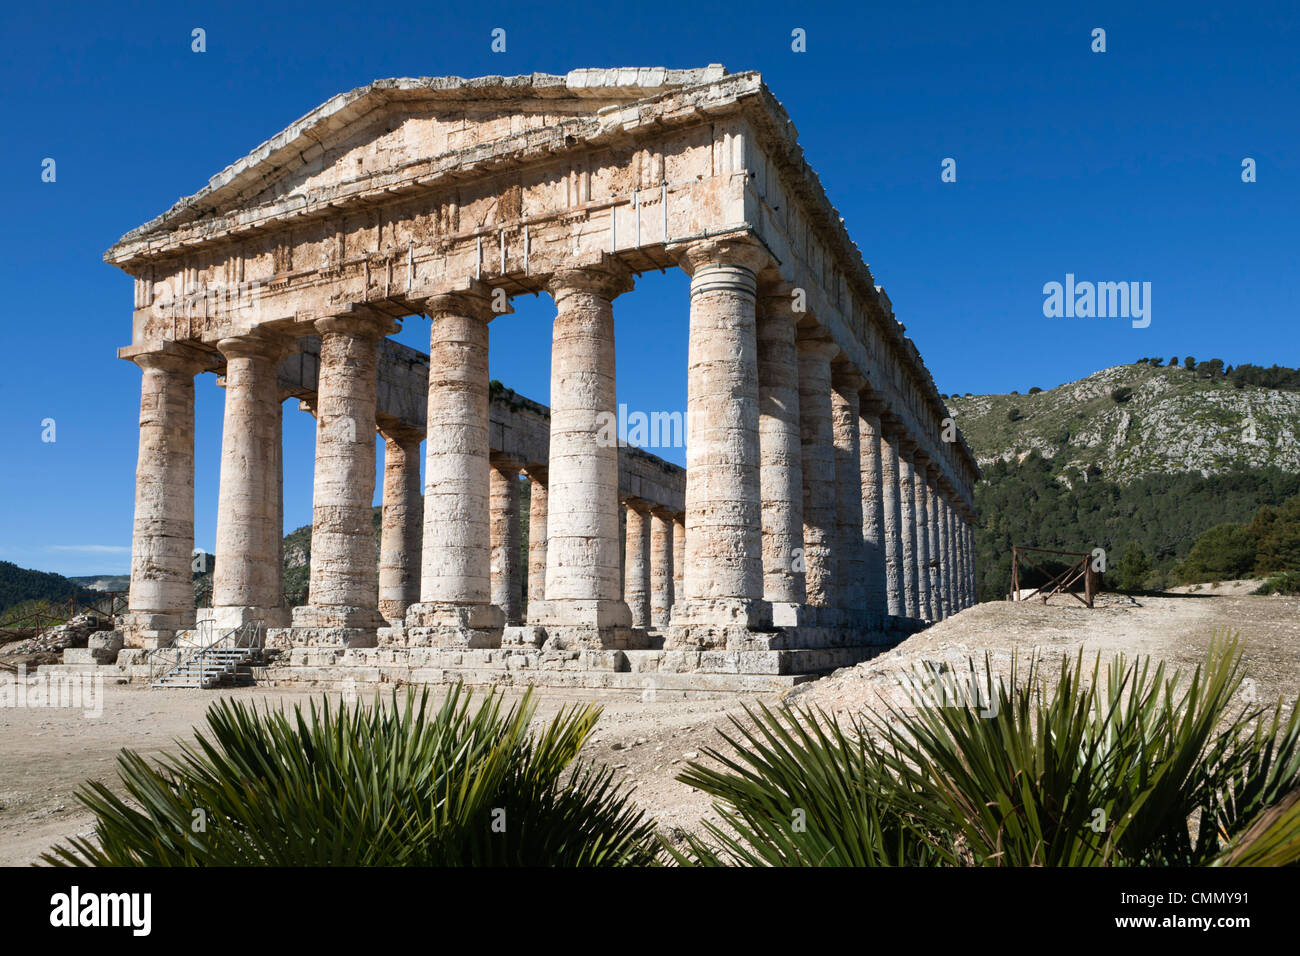 View of the Greek Doric Temple, Segesta, Sicily, Italy, Europe Stock Photo